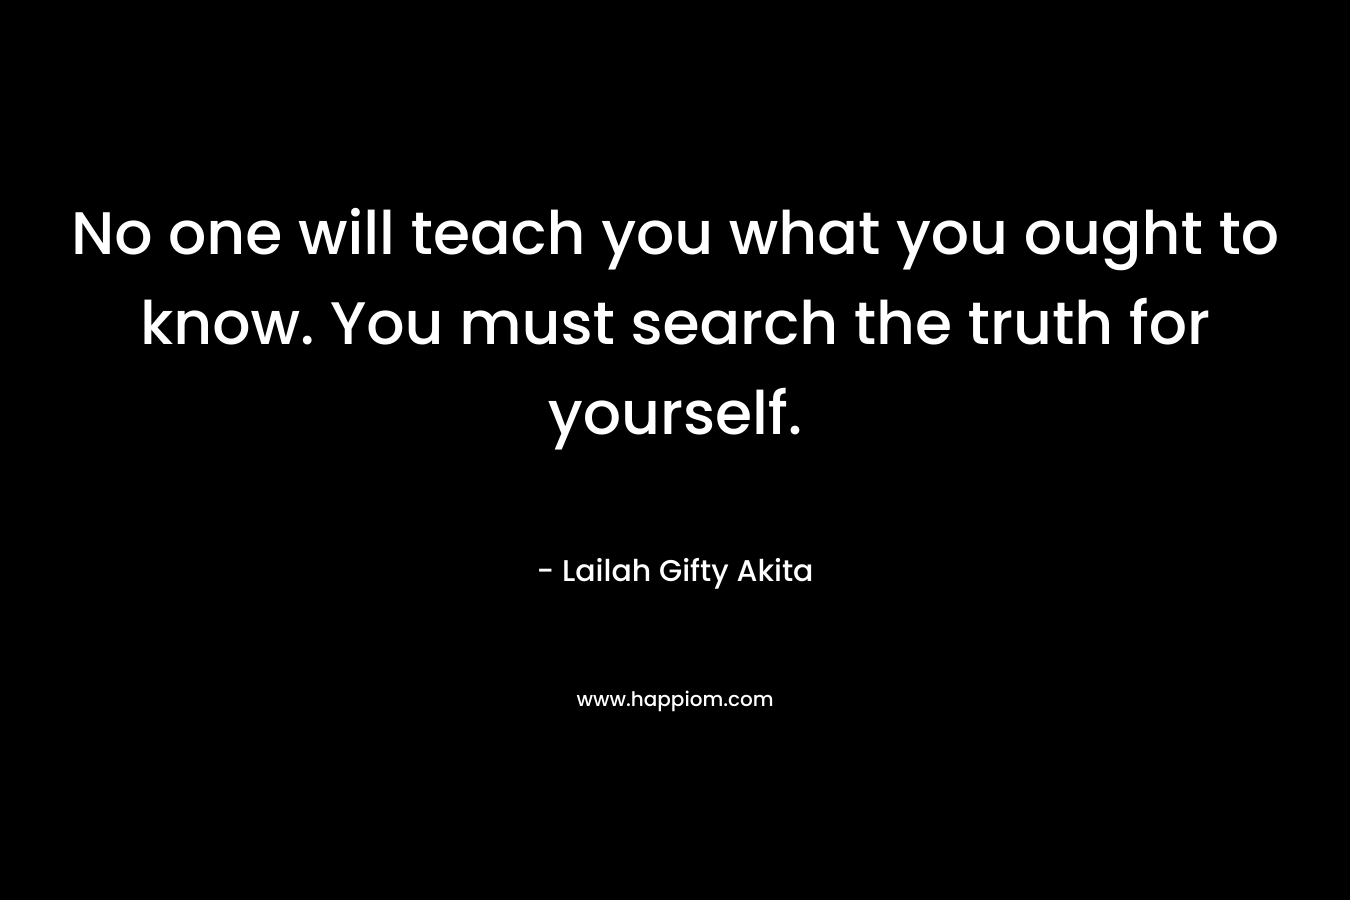 No one will teach you what you ought to know. You must search the truth for yourself.